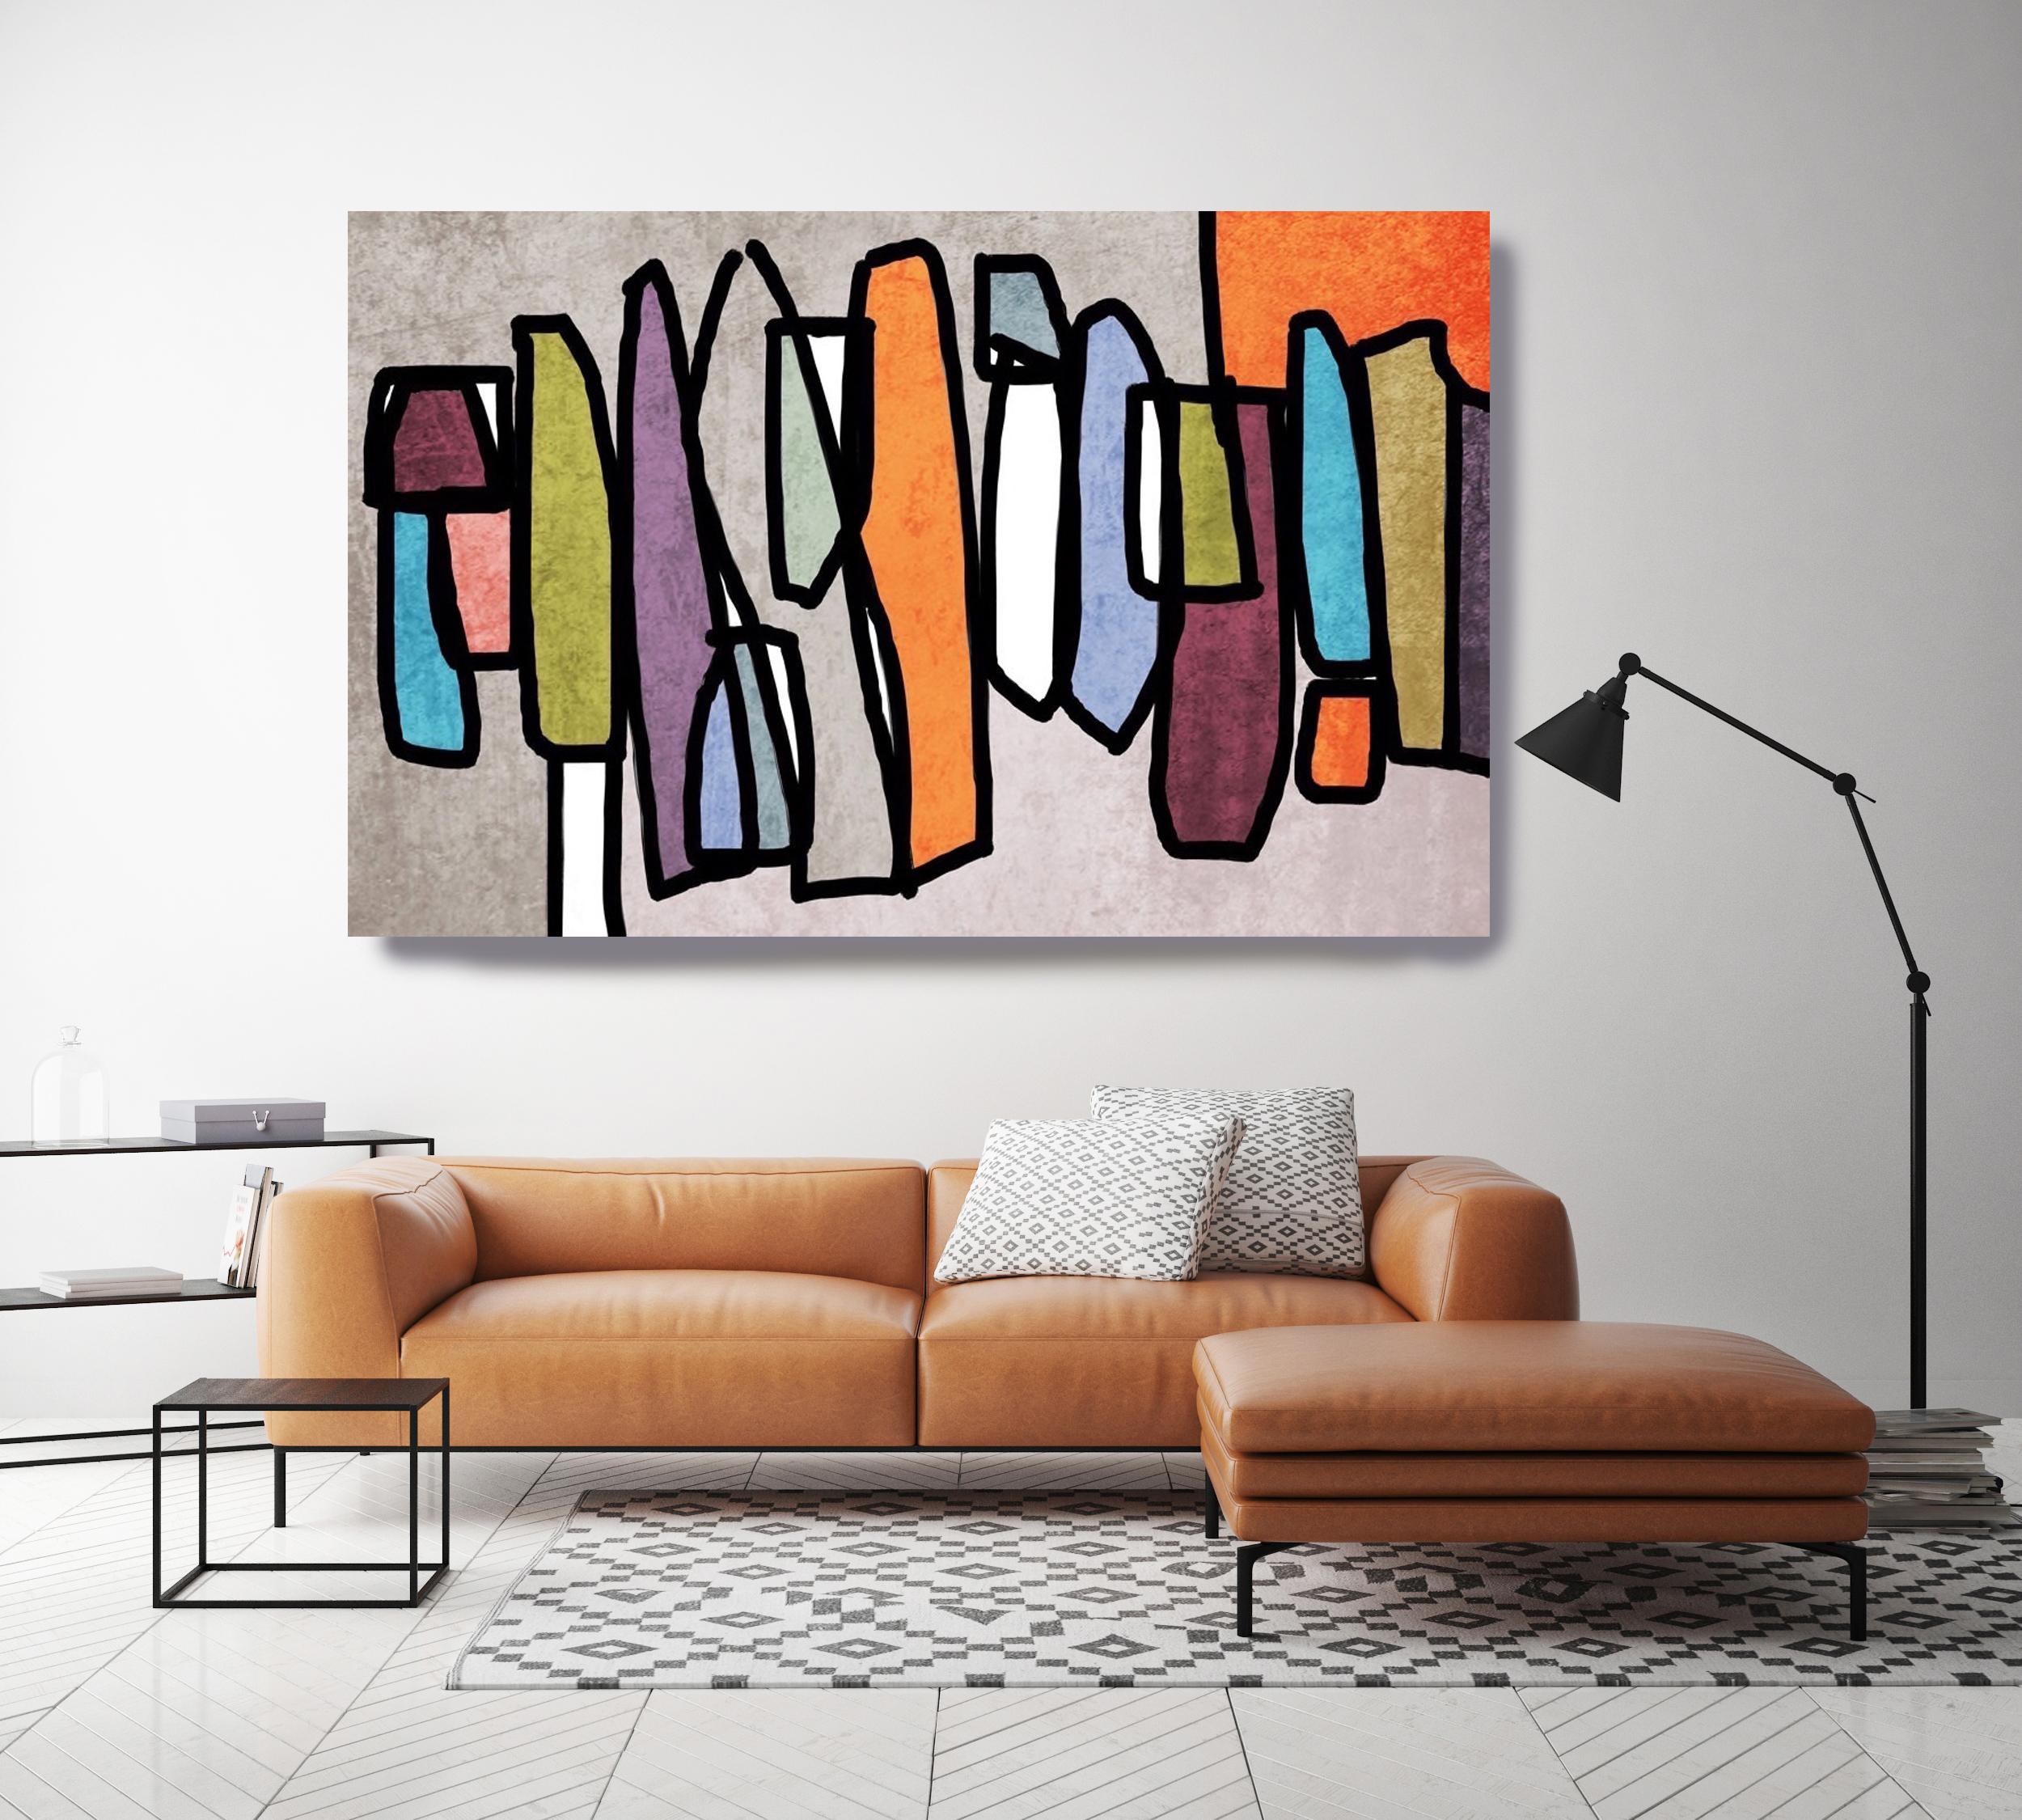 Vibrant Colorful Abstract-0-25-1,' an exquisite piece of Mid Century Modern Art by the renowned artist Irena Orlov.

This is no ordinary artwork; it's a limited edition Giclee meticulously hand embellished by the artist herself, making each piece a